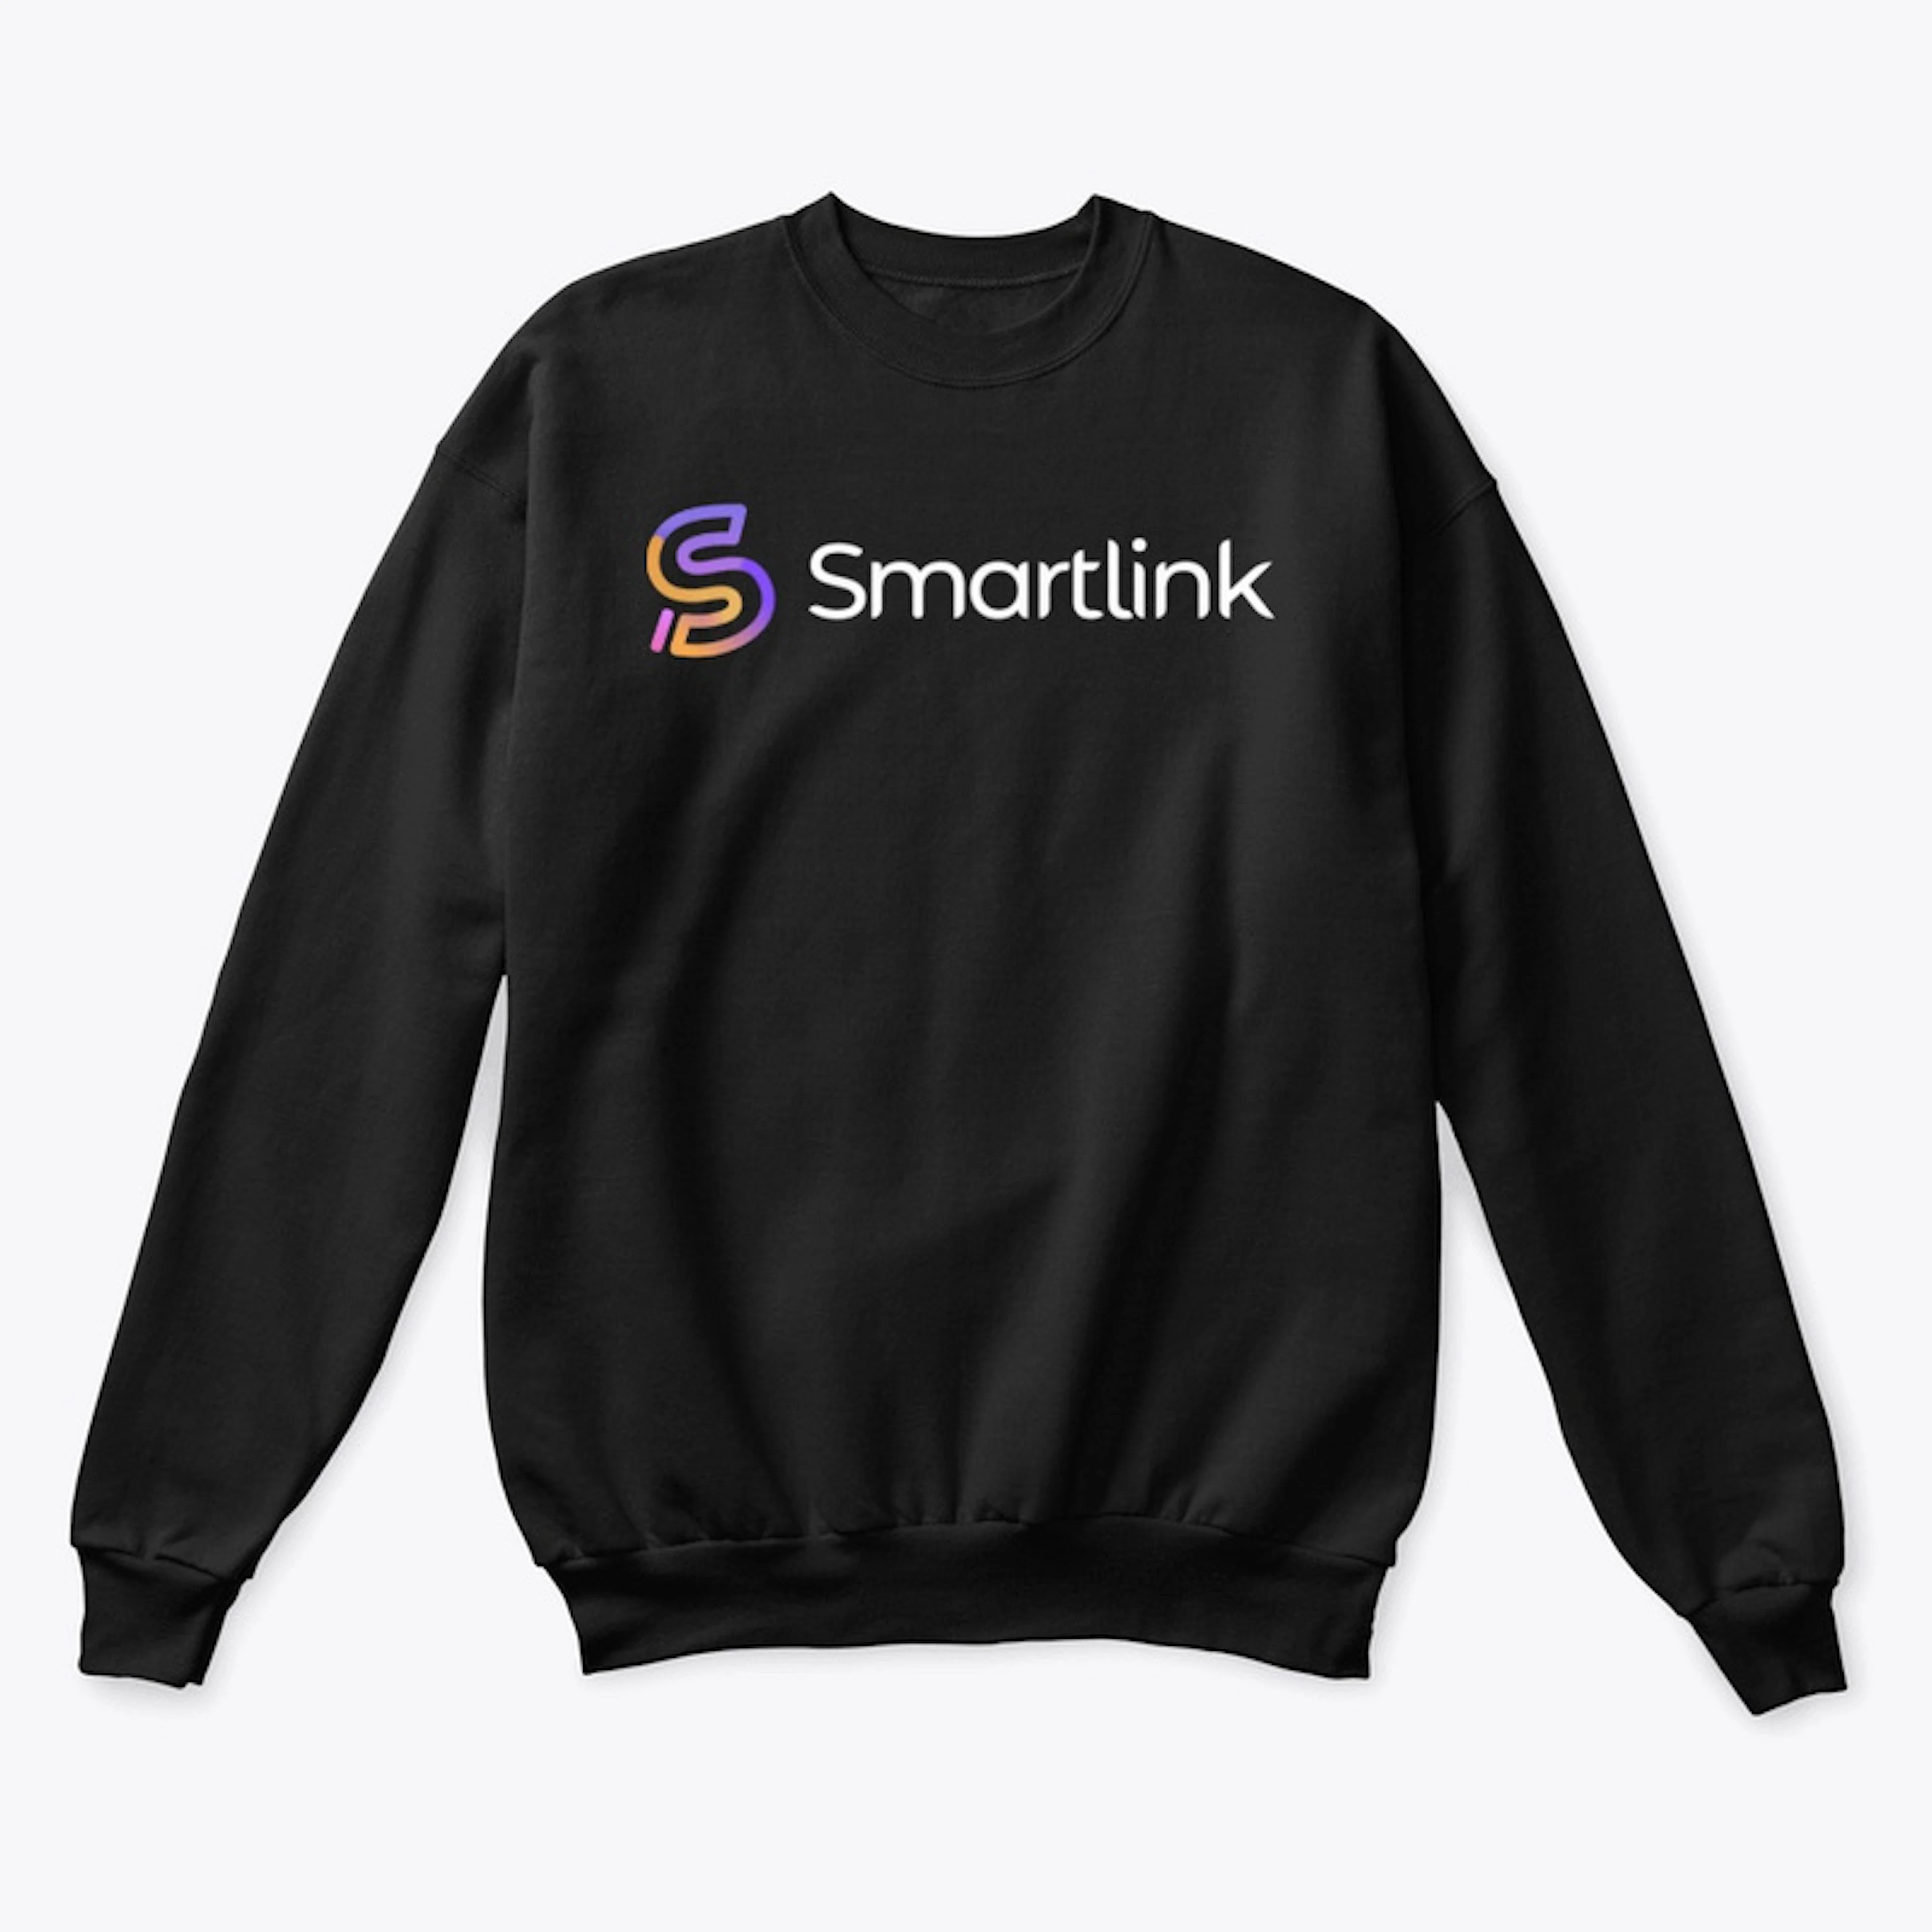 Smartlink apparel to SMAK your Lifestyle